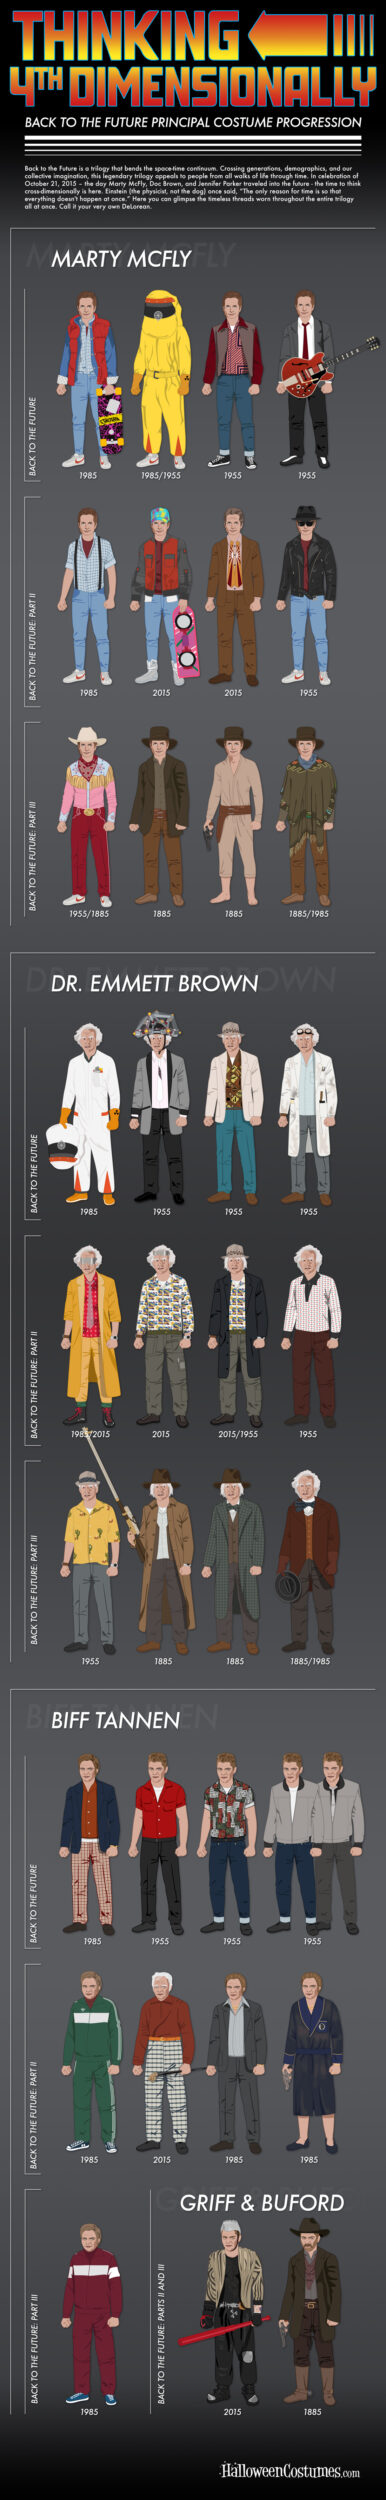  Back to the Future Costumes Infographic